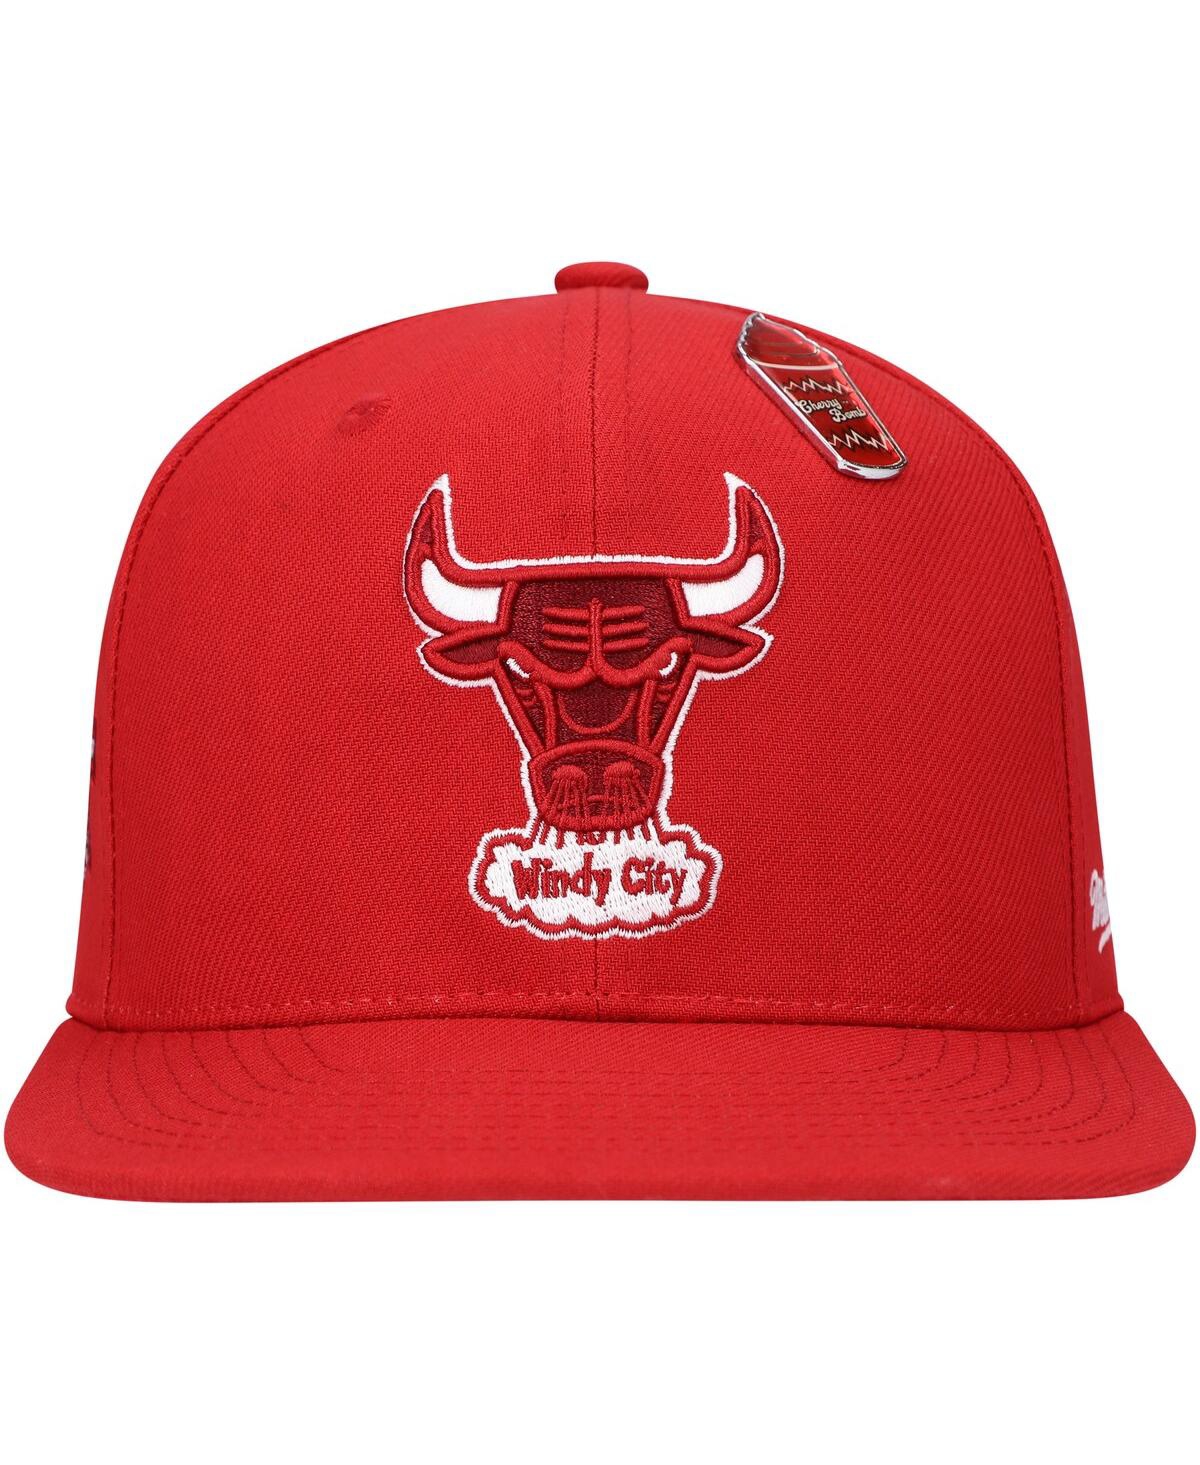 Shop Mitchell & Ness Men's  Red Chicago Bulls Hardwood Classics 20th Anniversary Cherry Bomb Fitted Hat